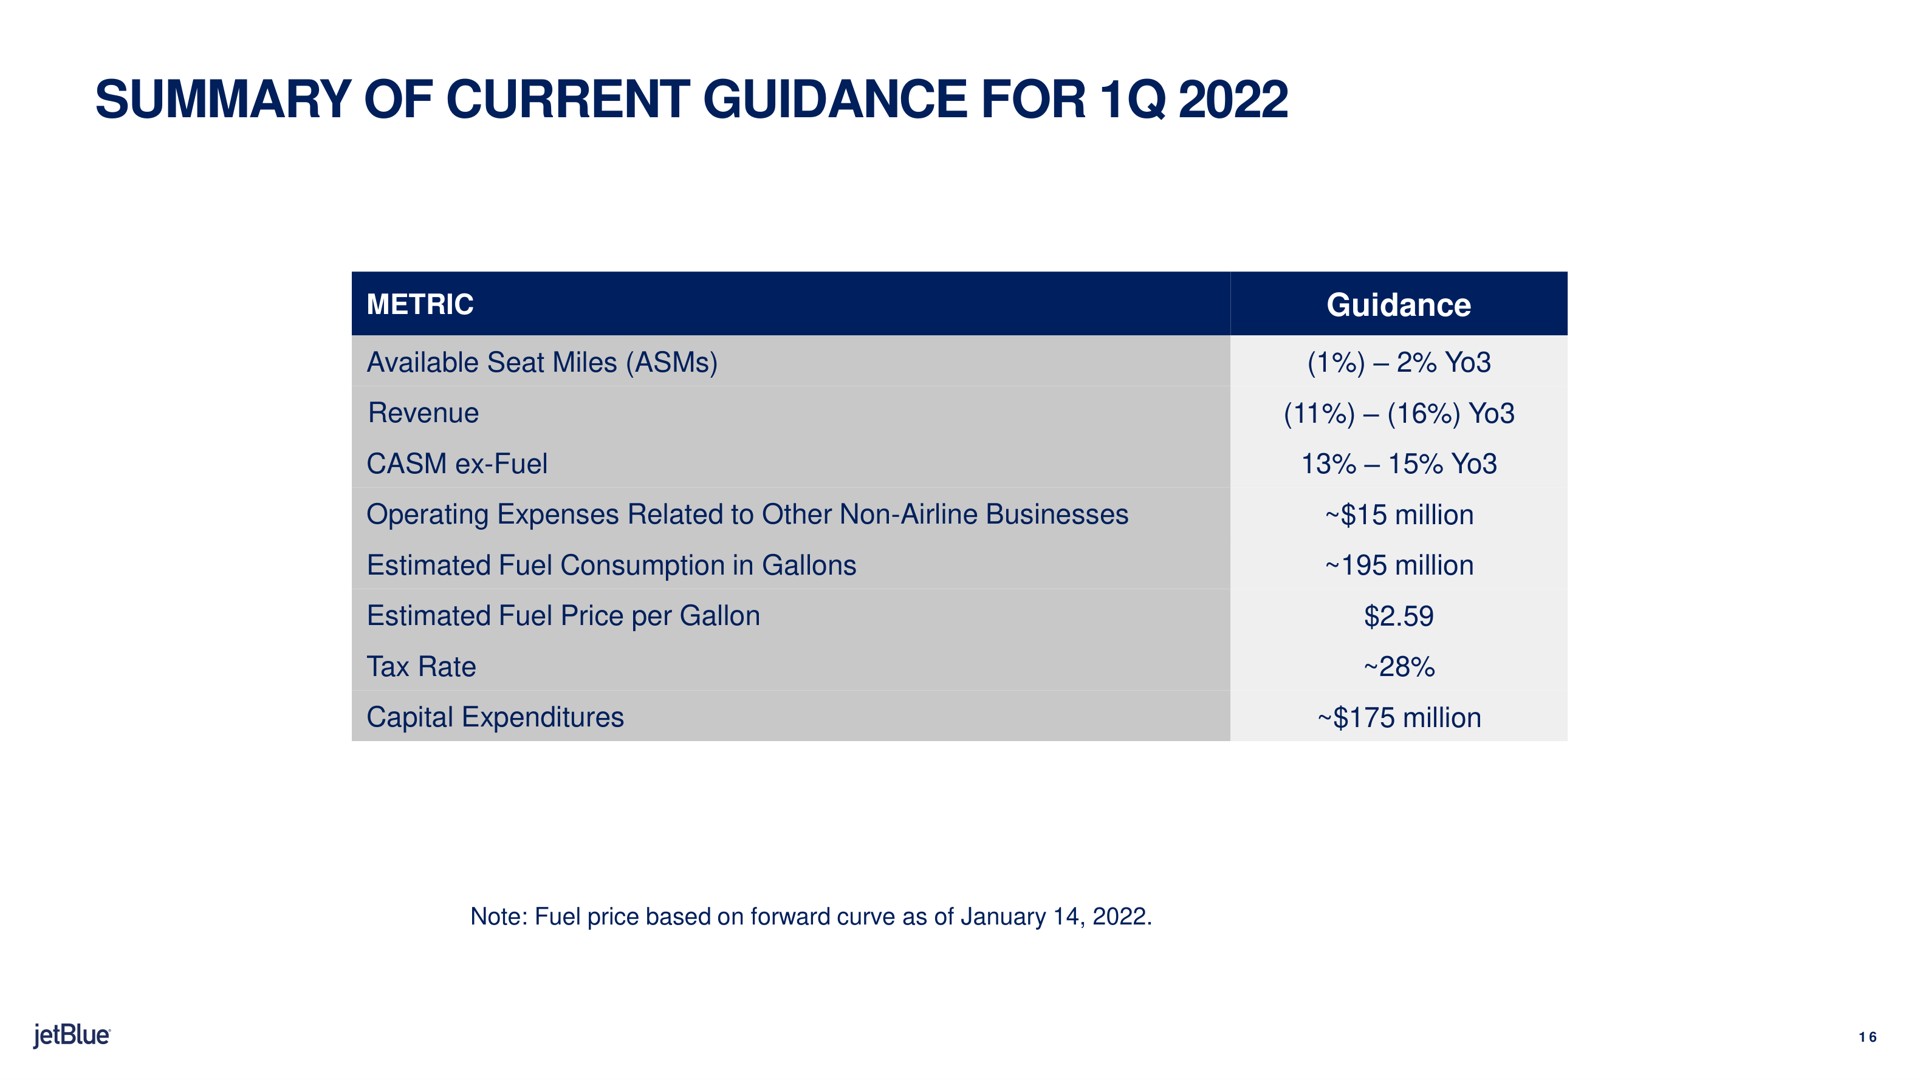 summary of current guidance for guidance revenue | jetBlue